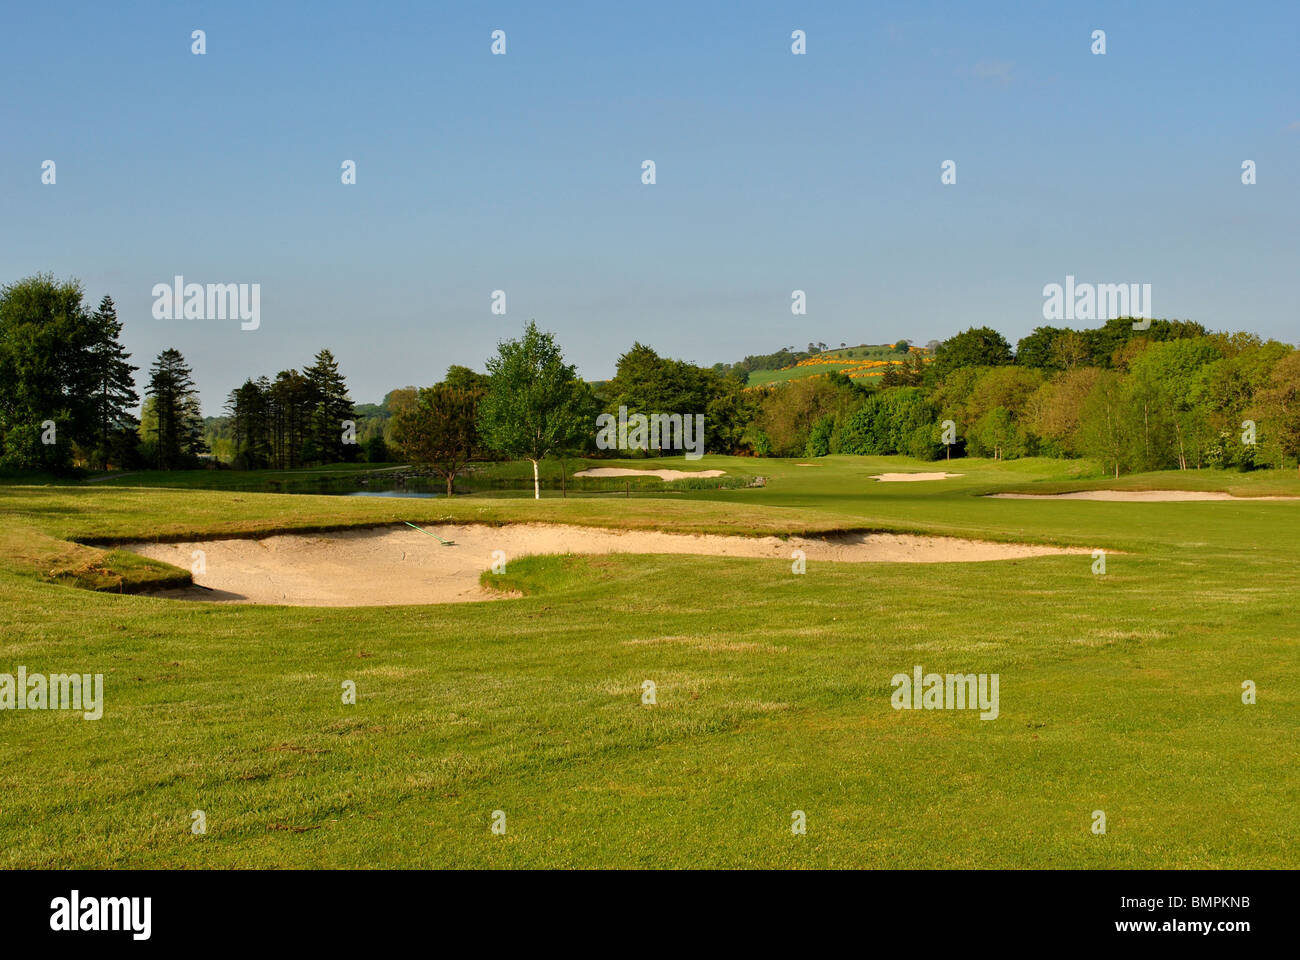 bunkers on a golf course Stock Photo